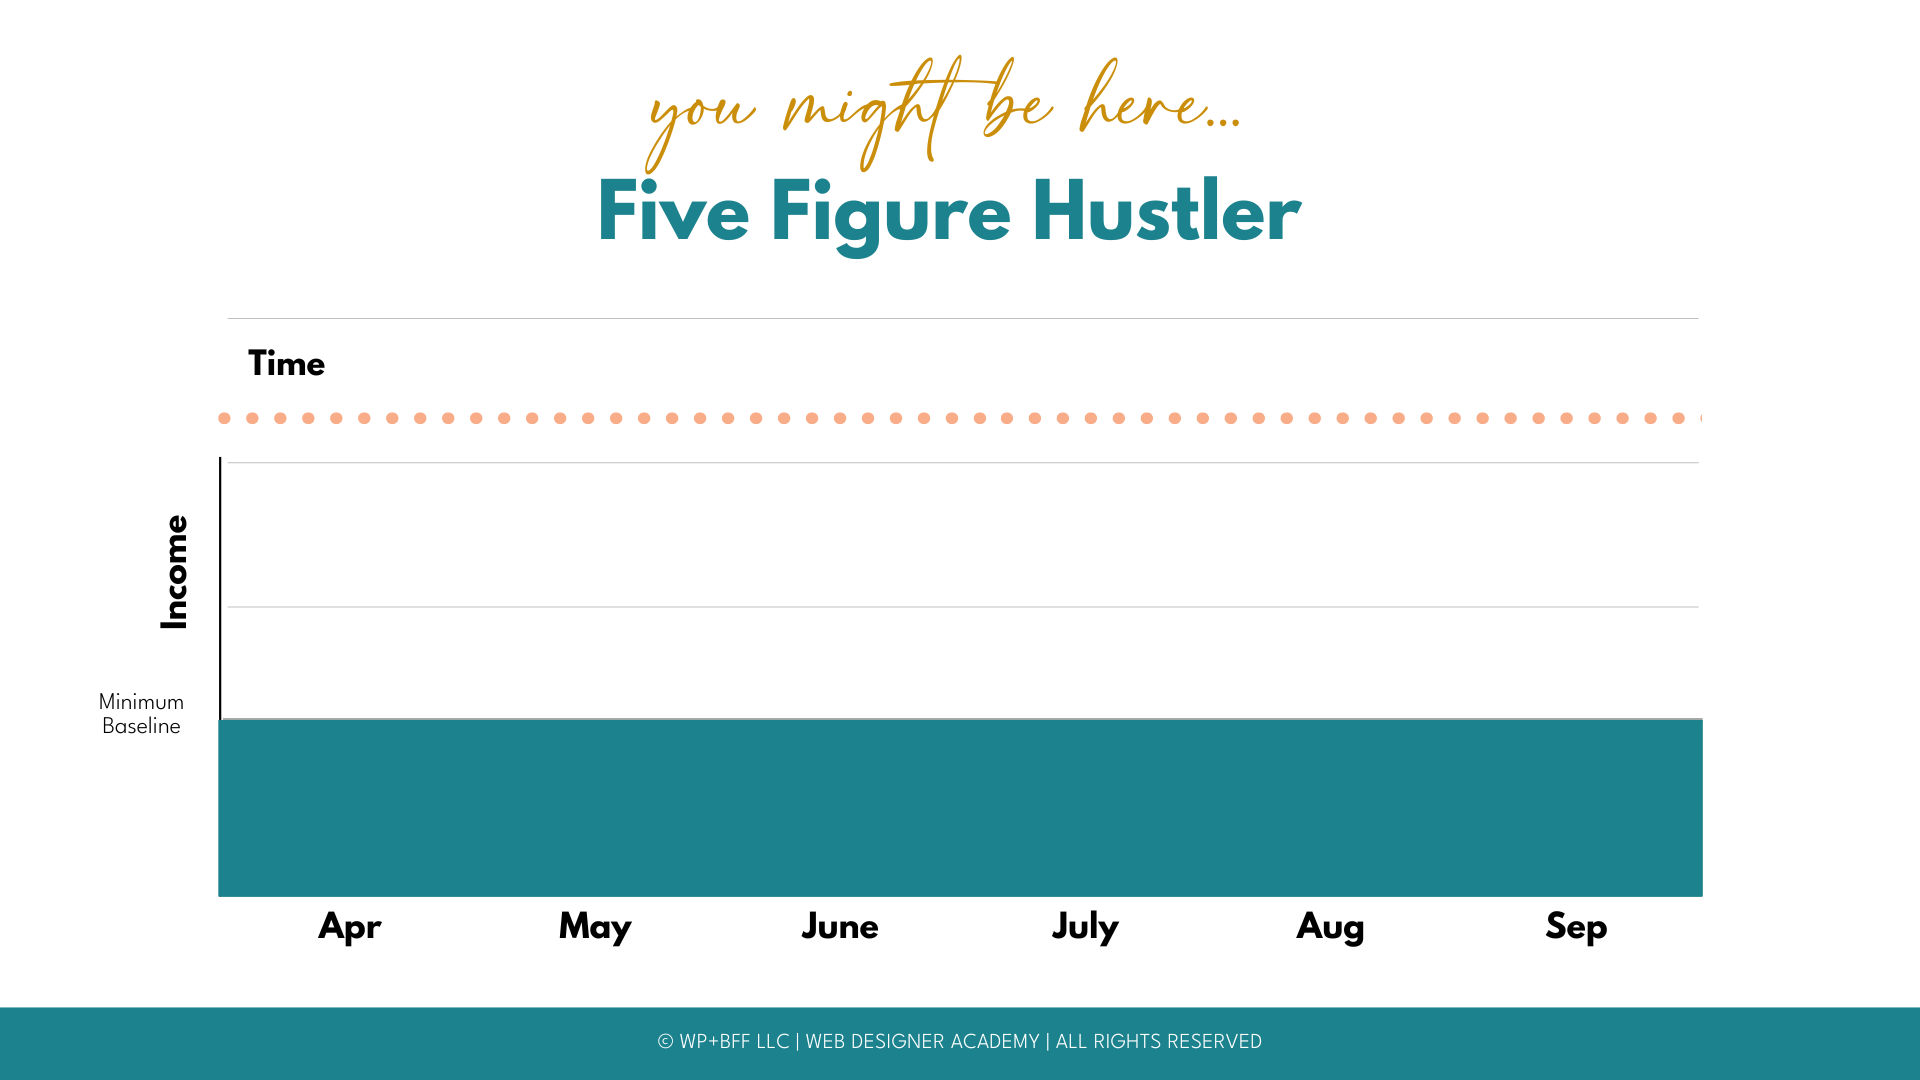 A person is viewing the Five Figure Hustler Time Income Minimum Baseline for the months of May through September at WP+BFF LLC's Web Designer Academy. Full Text: you might be here ... Five Figure Hustler Time Income Minimum Baseline May June July Aug Sep Apr @ WP+BFF LLC | WEB DESIGNER ACADEMY | ALL RIGHTS RESERVED